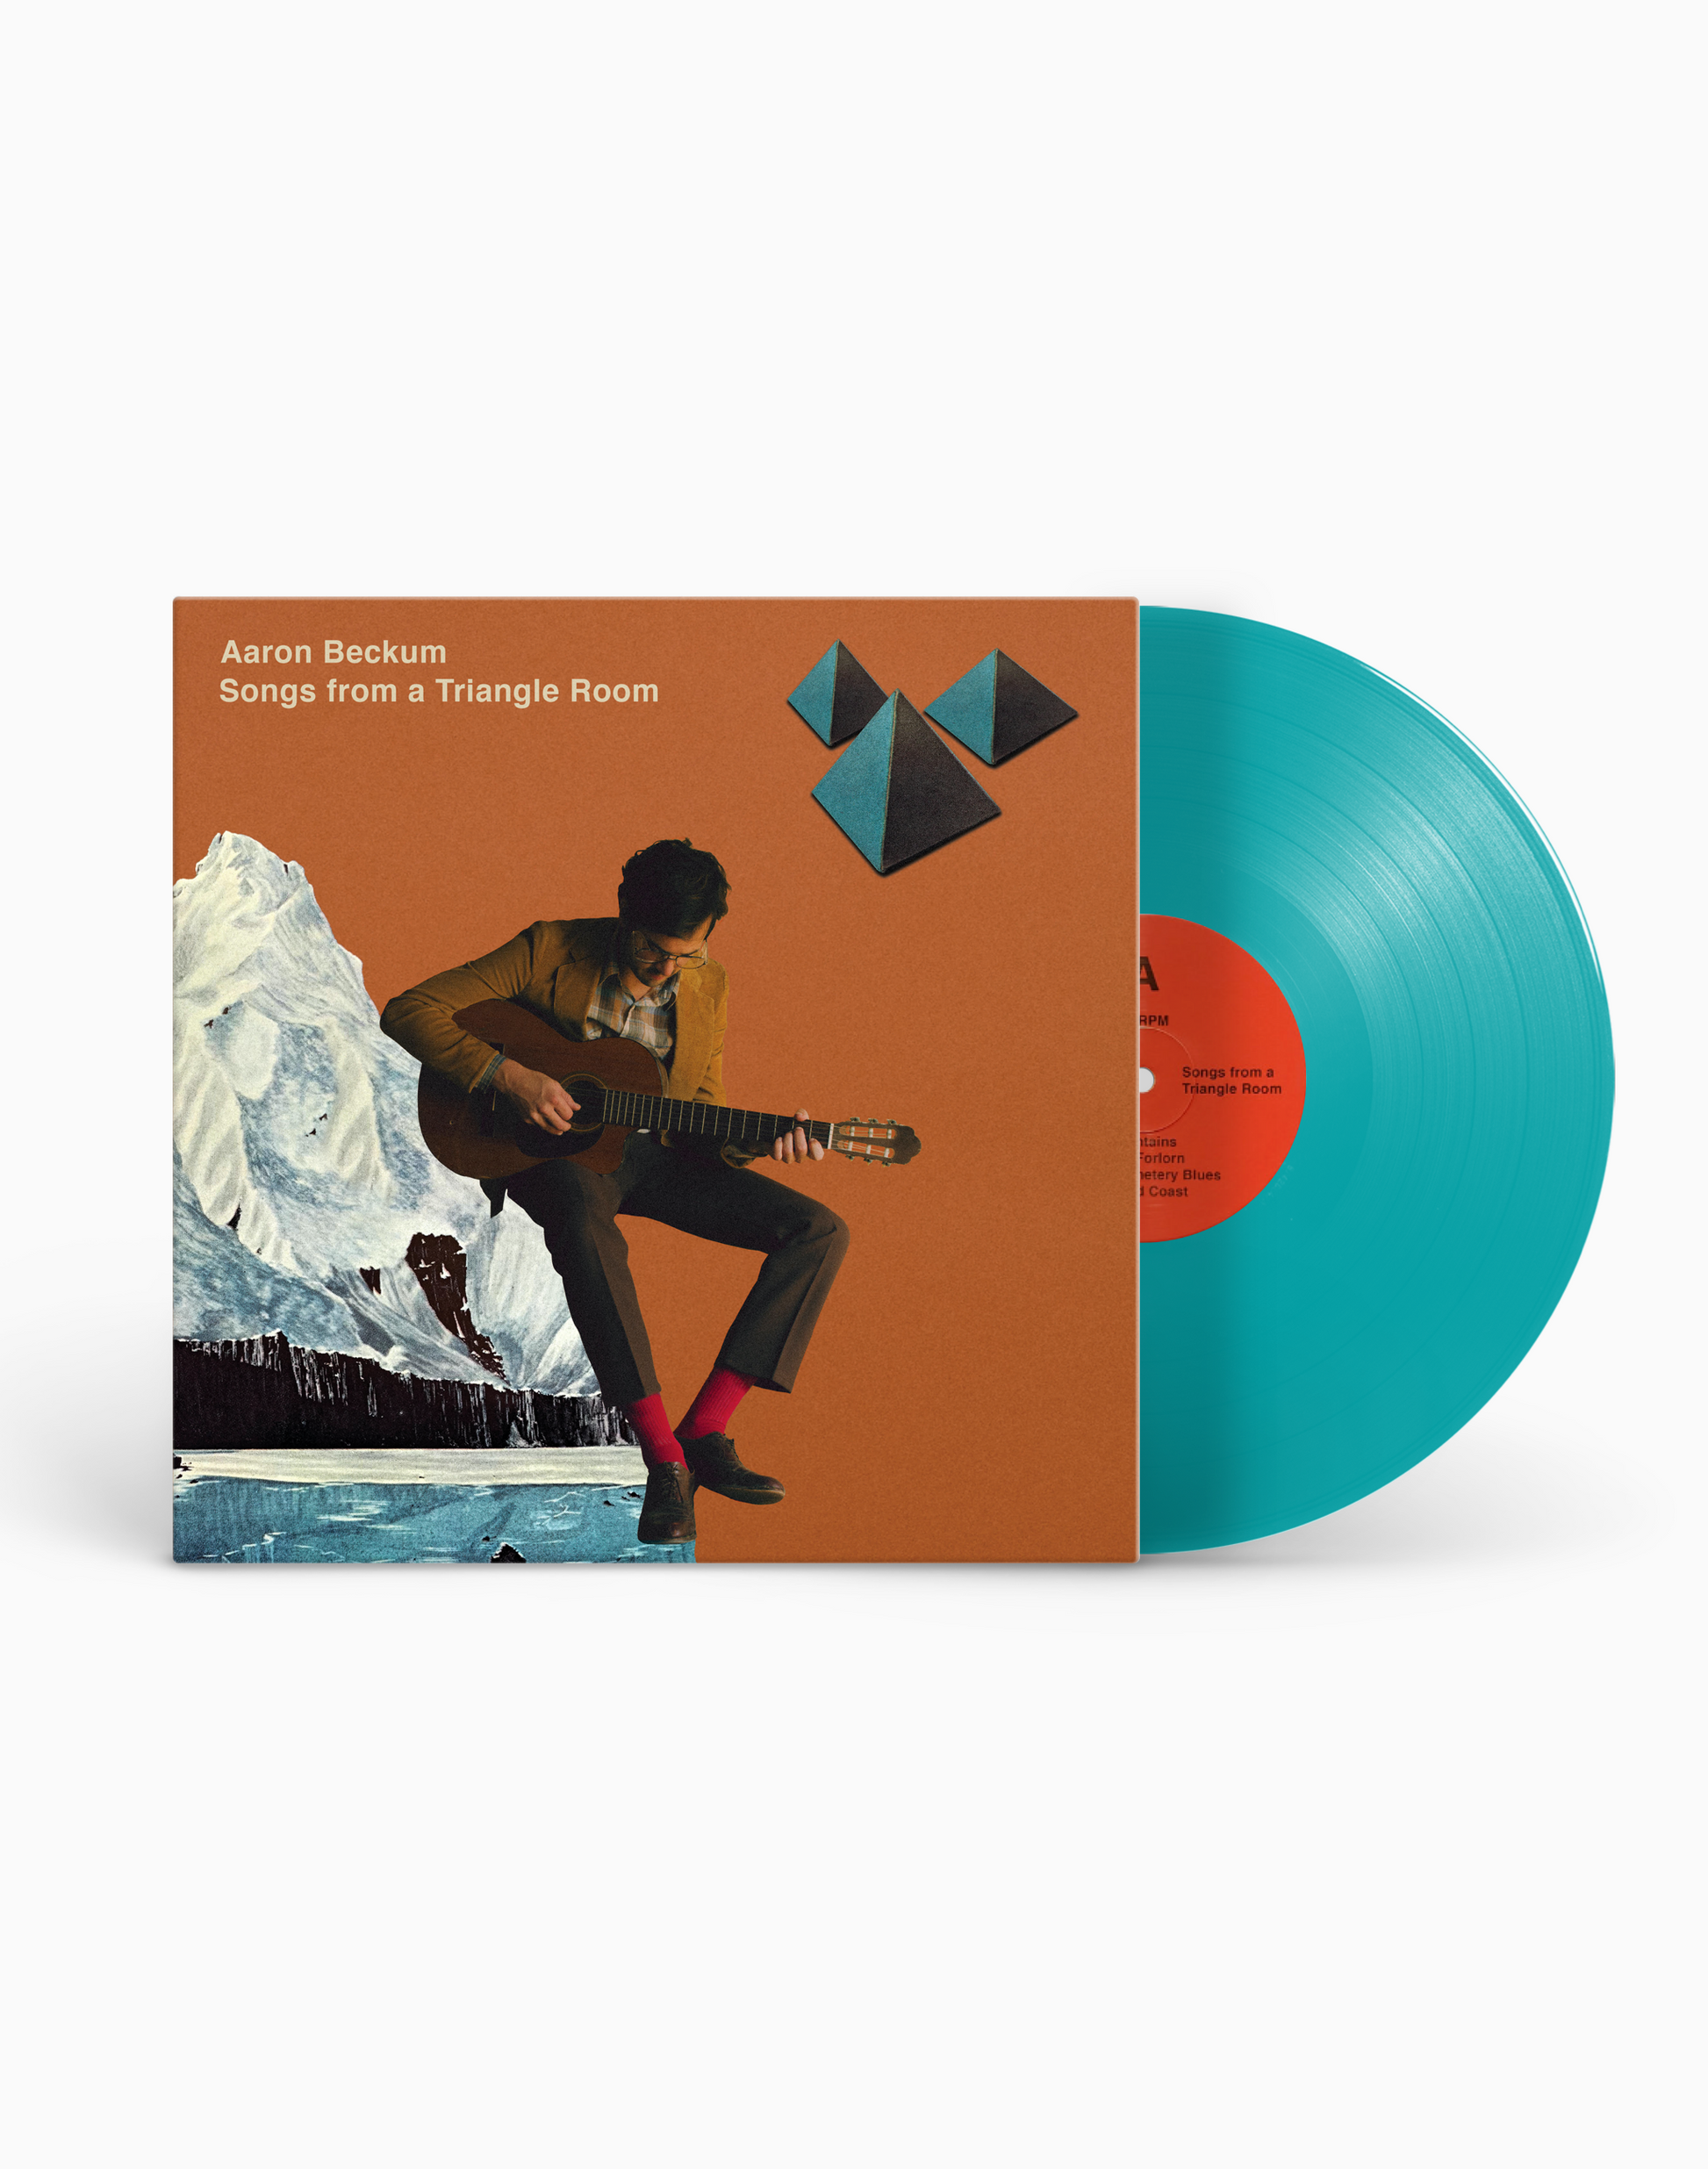 Aaron Beckum - Songs From A Triangle Room LP - Hipnosis